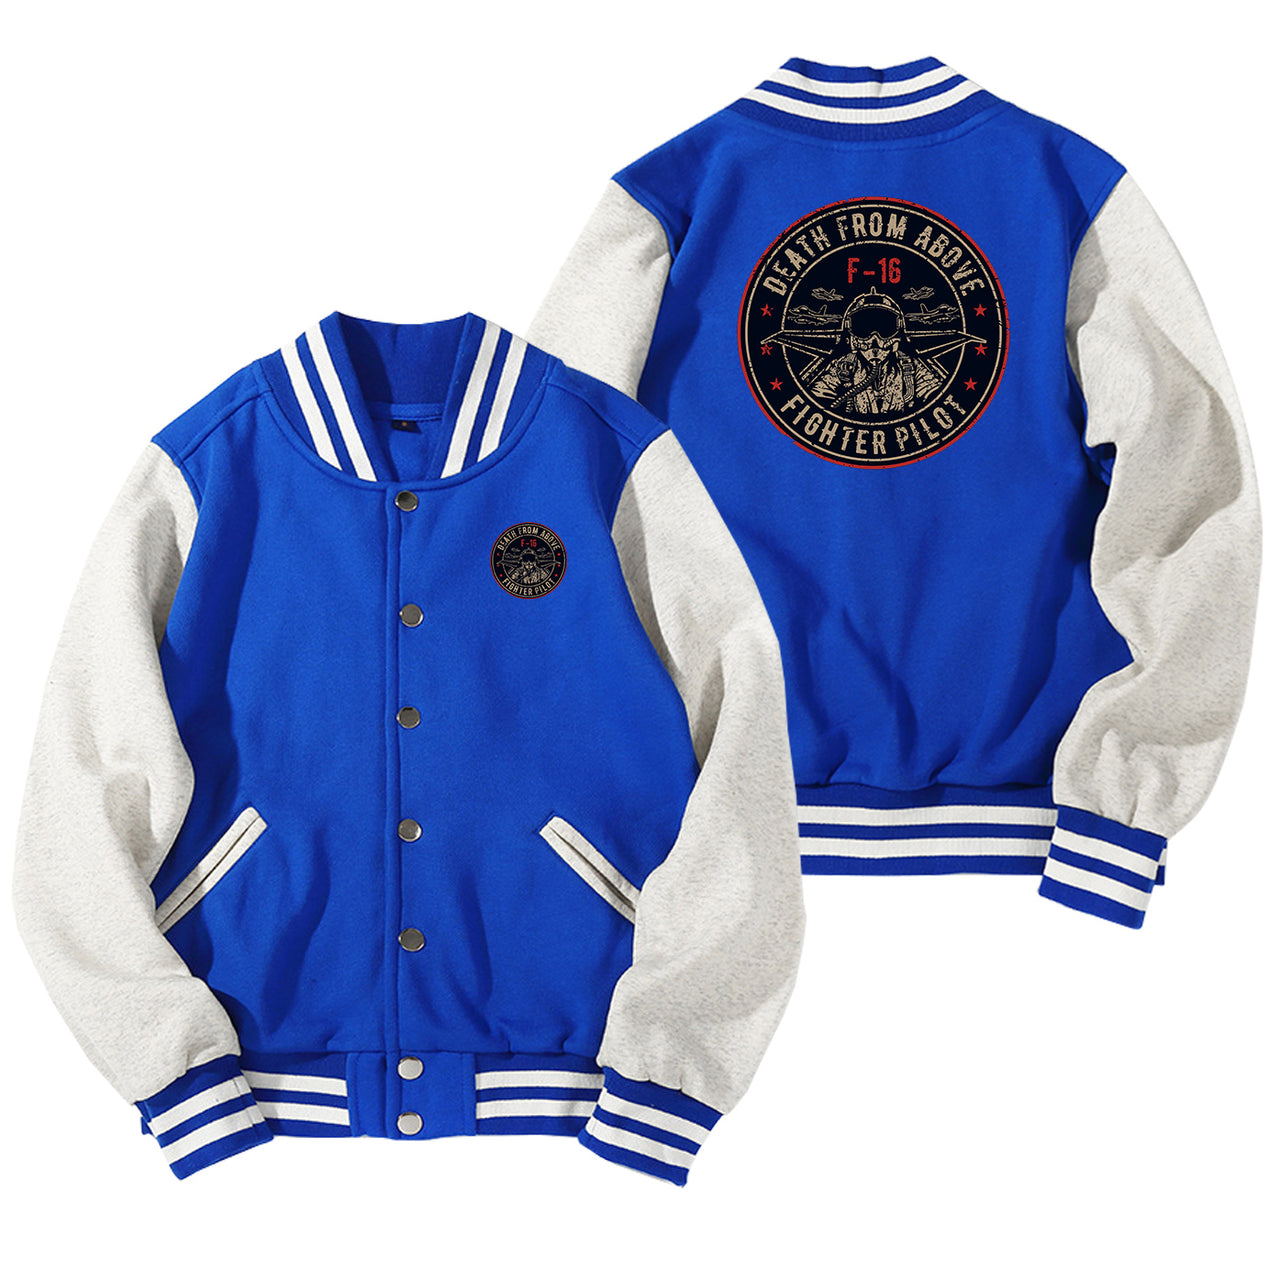 Fighting Falcon F16 - Death From Above Designed Baseball Style Jackets